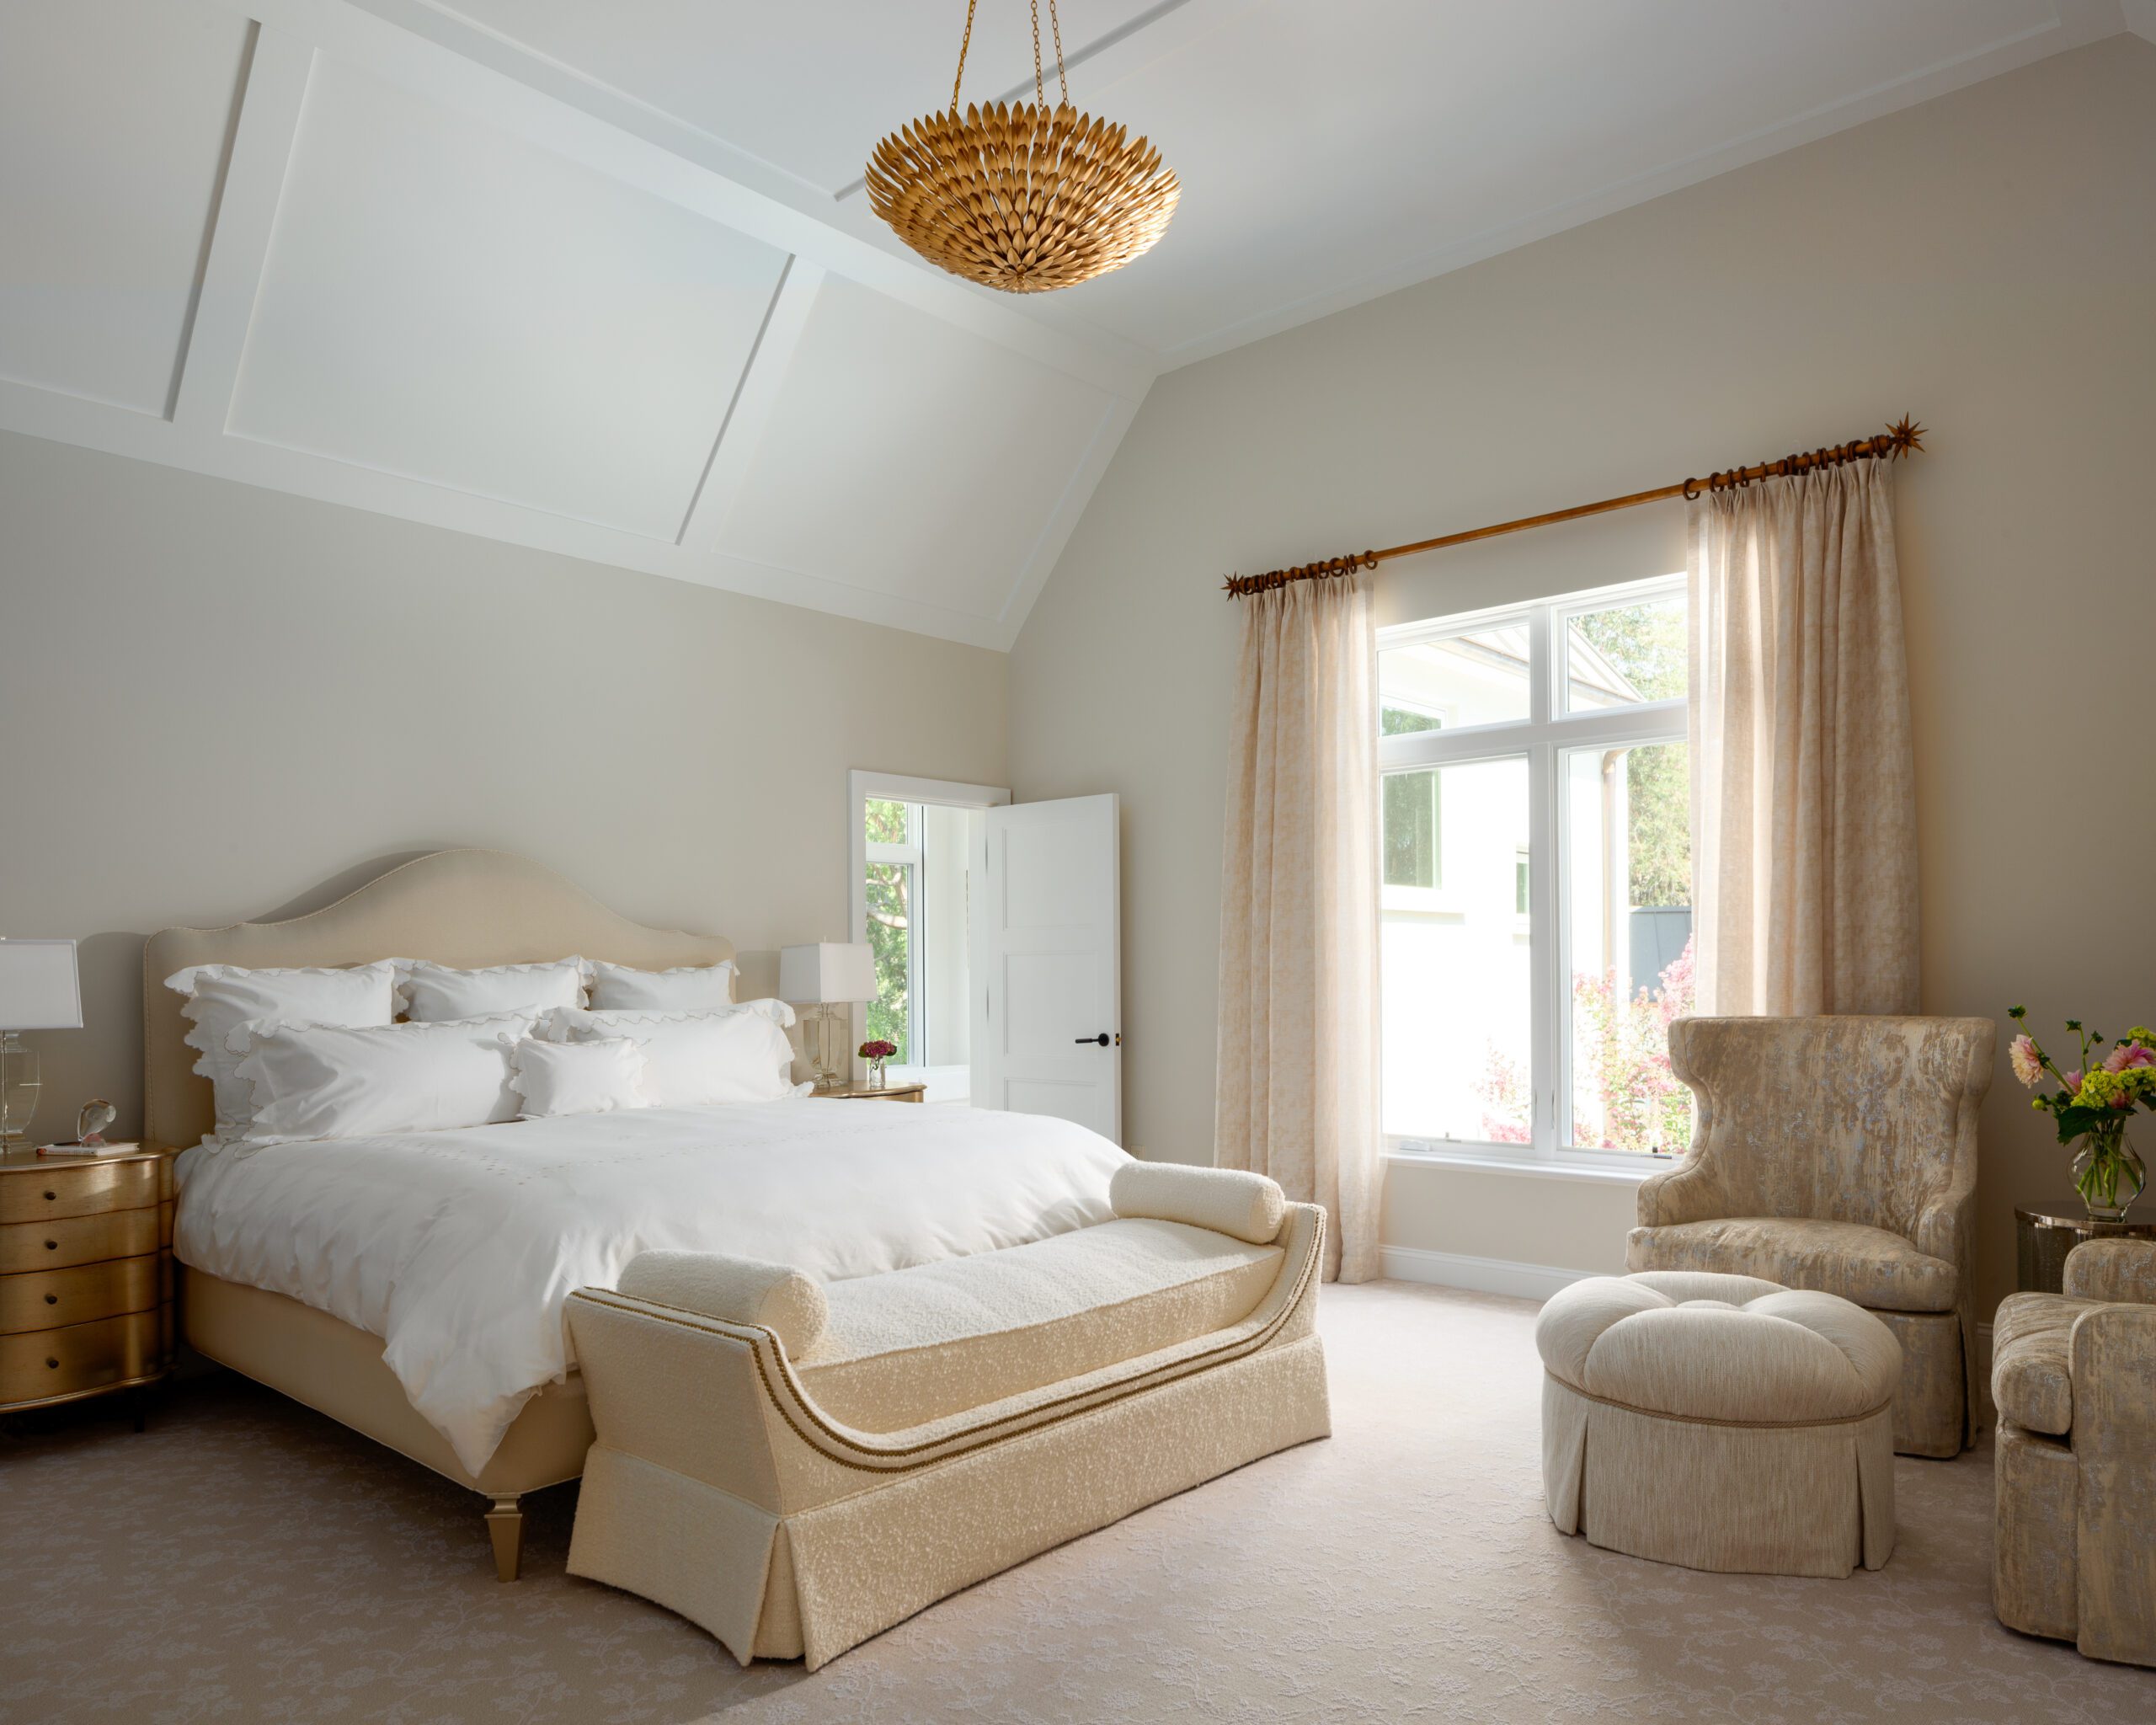 Vaulted Ceiling White Bedroom